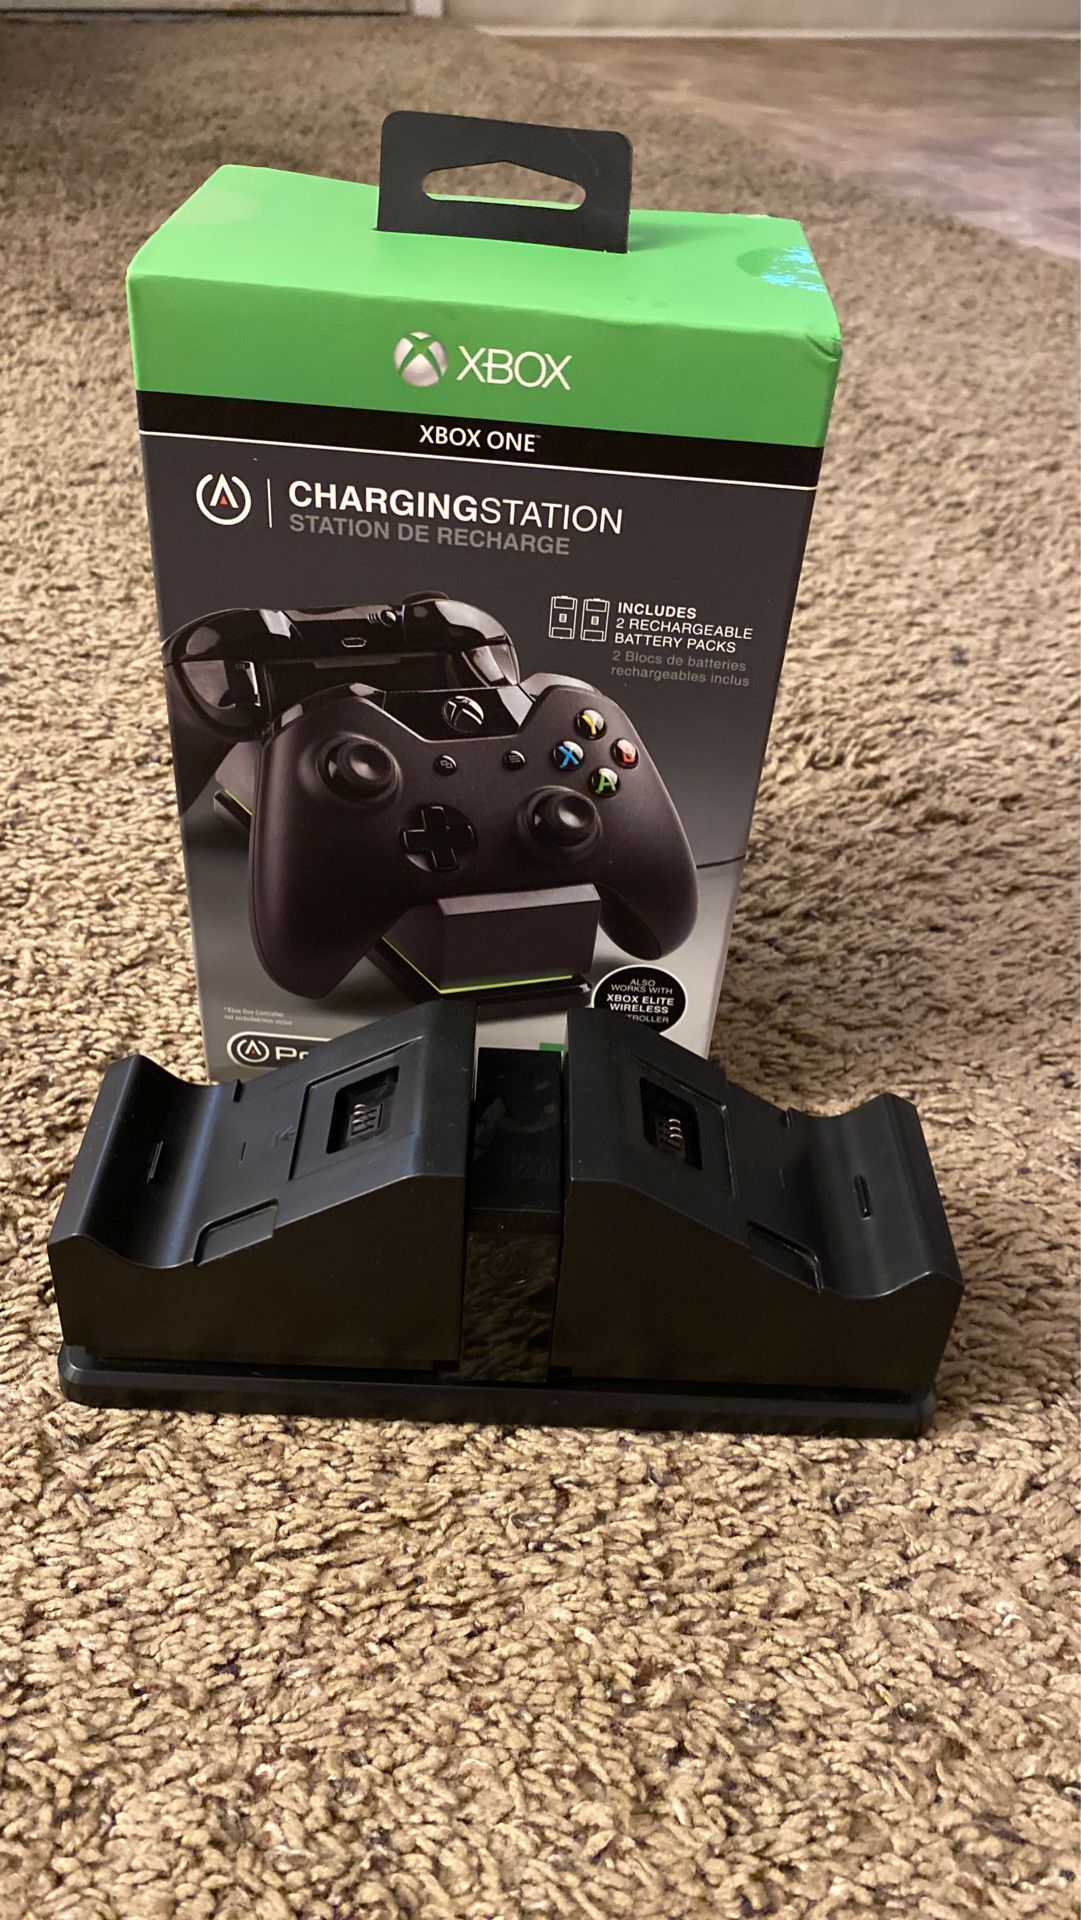 Xbox One original controller charging station! Includes 2 rechargeable battery